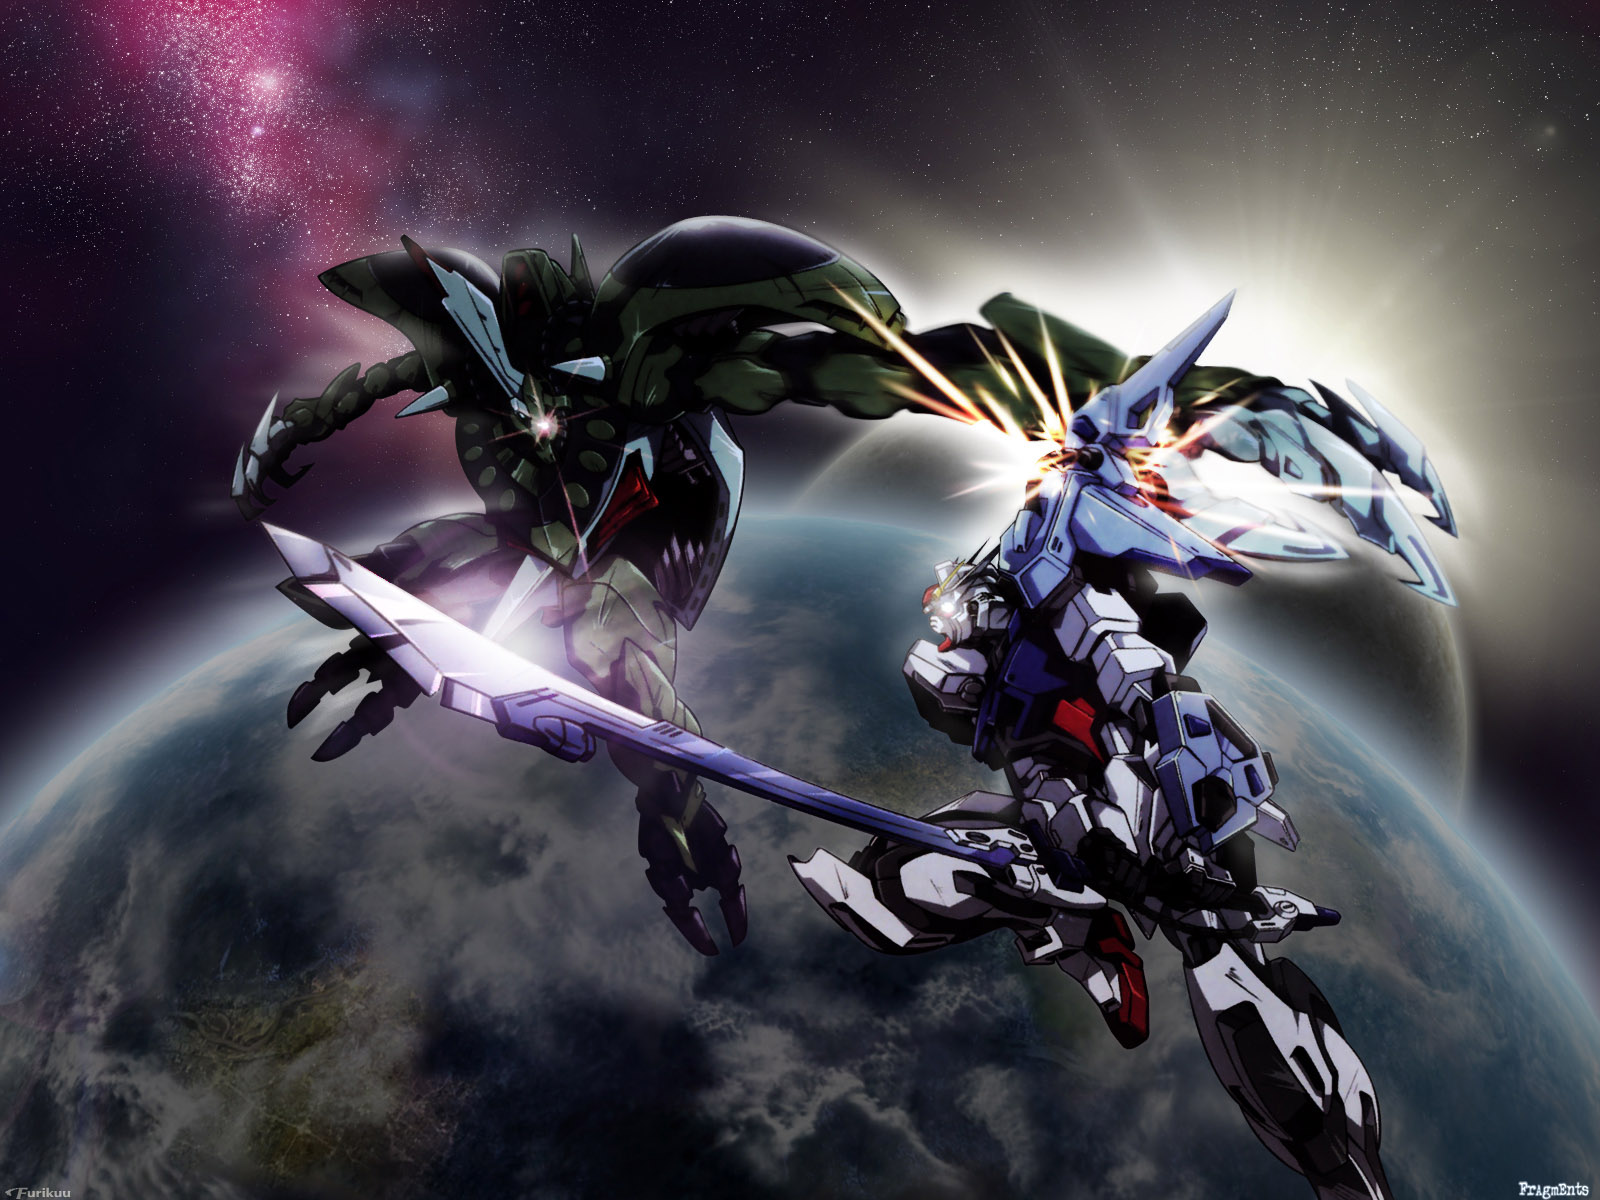 170+ Anime Gundam HD Wallpapers and Backgrounds